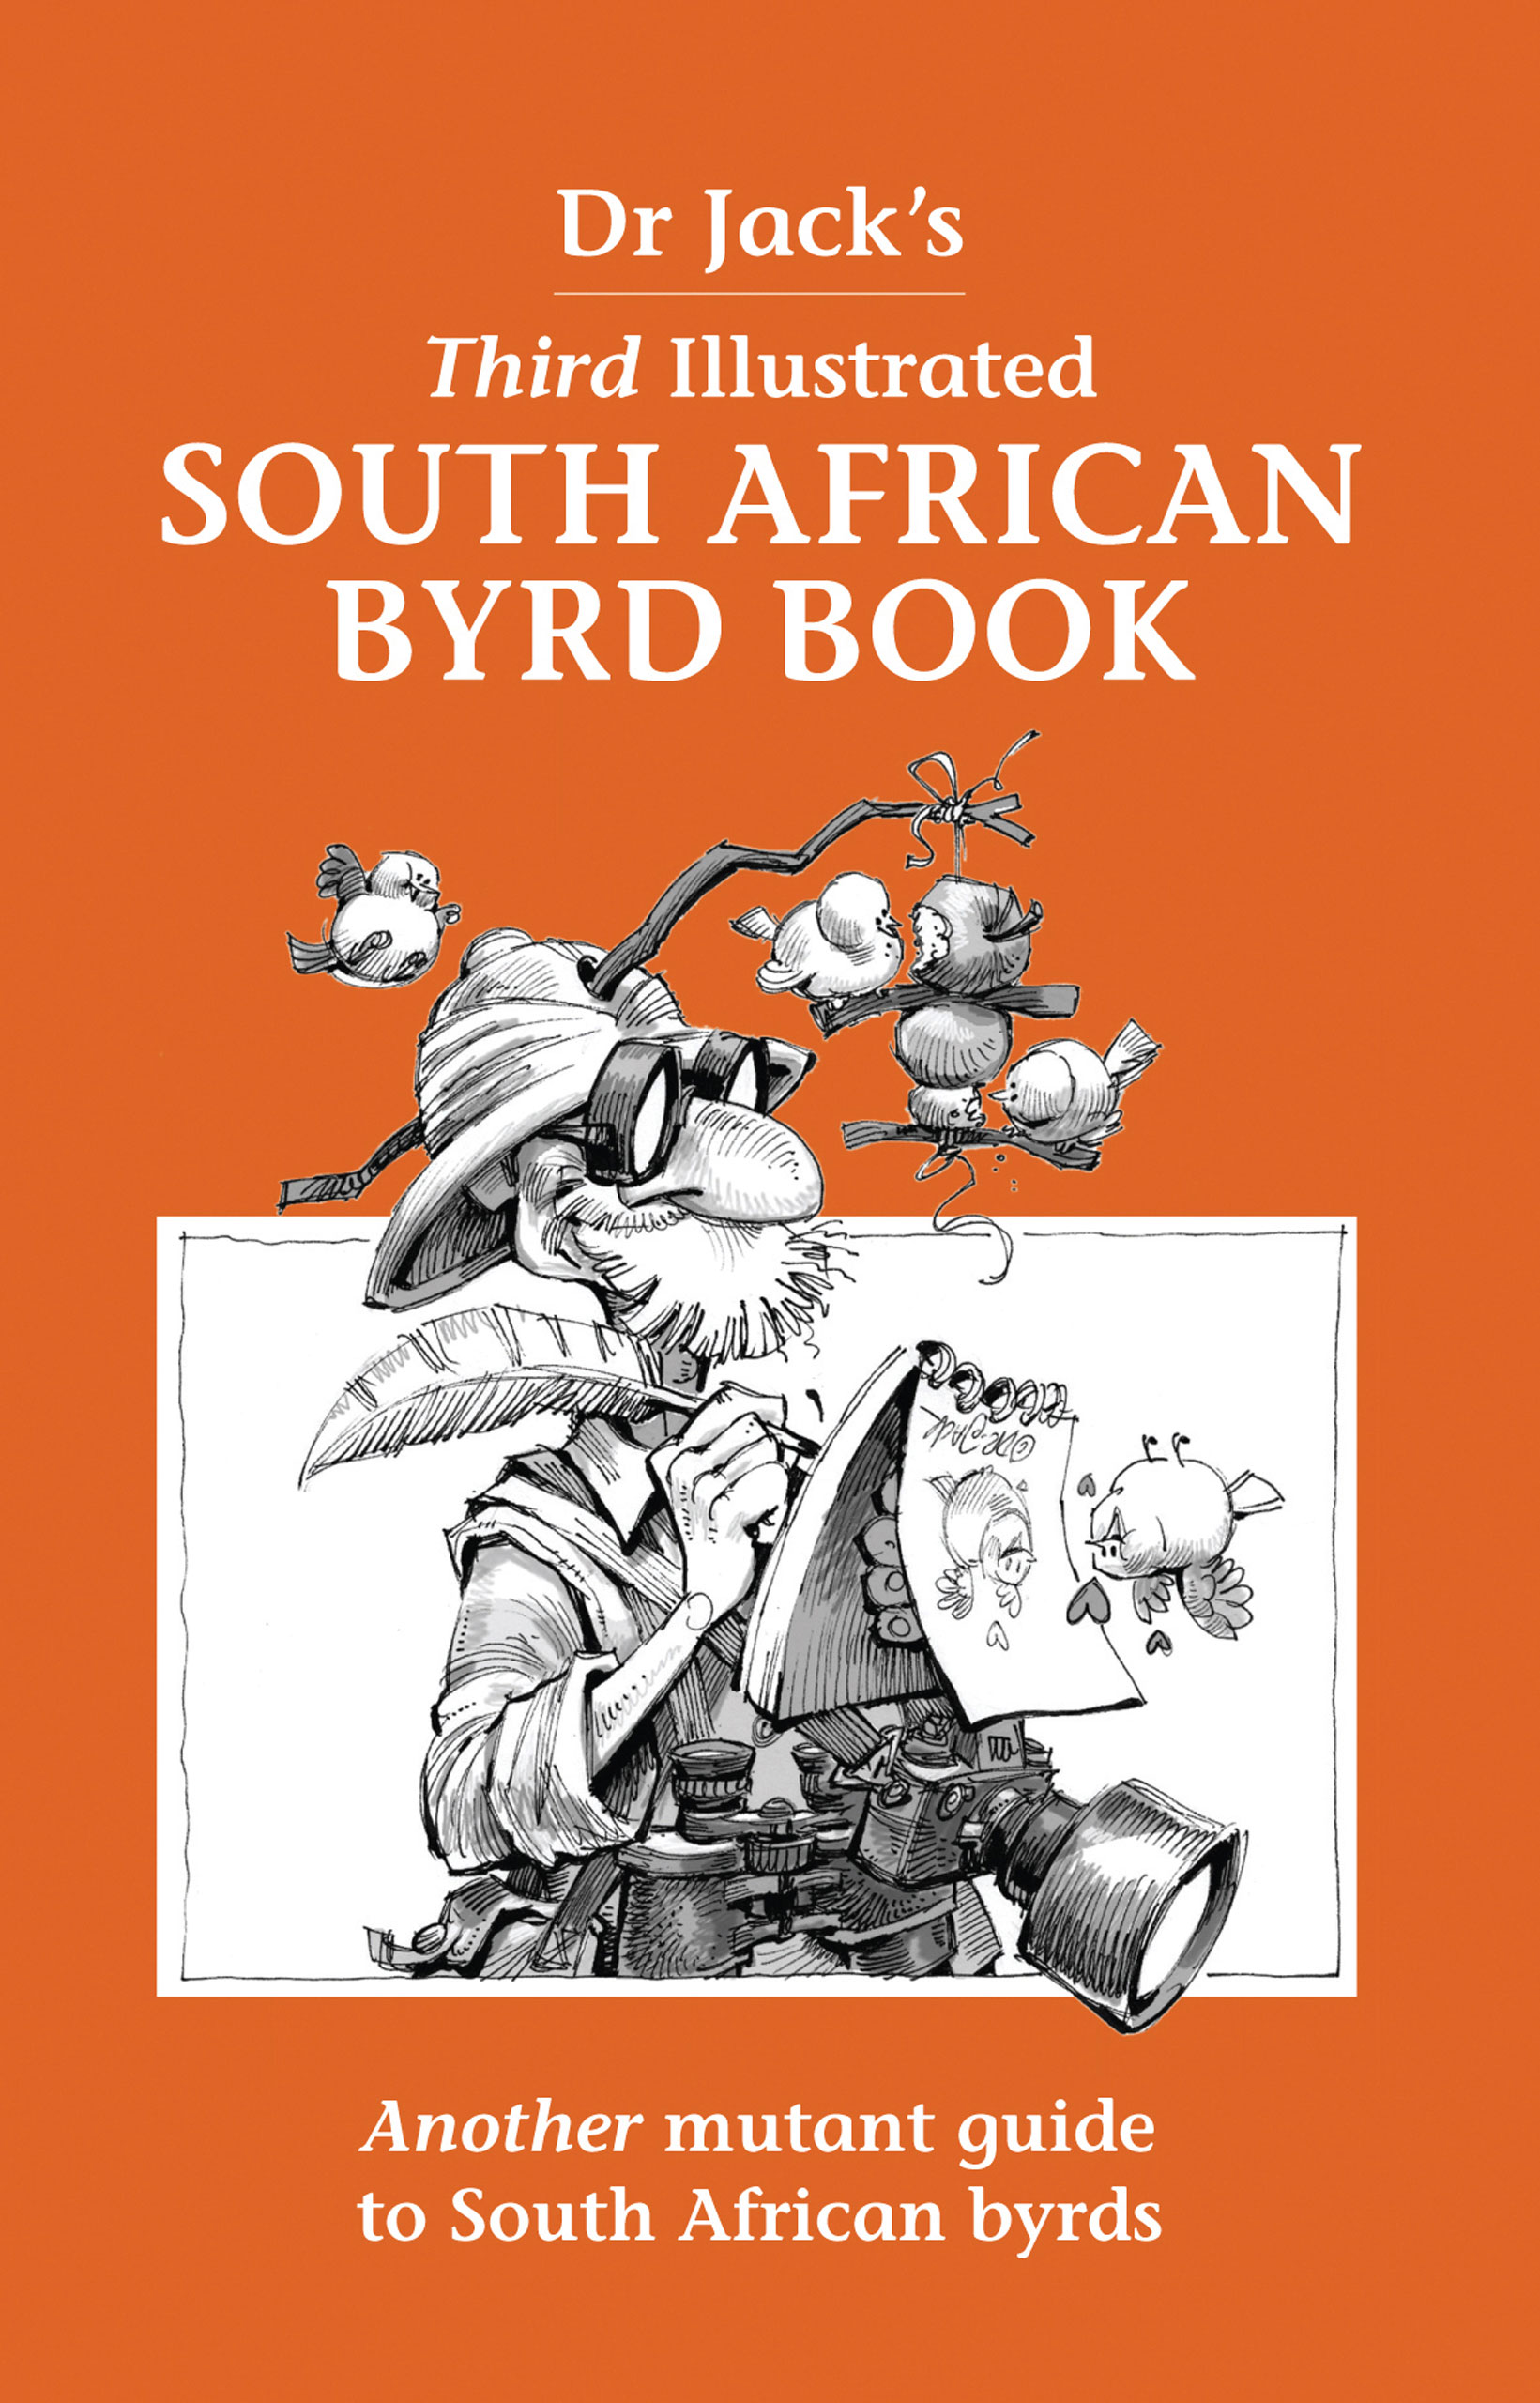 Picture of Dr Jack's illustrated South African byrd book